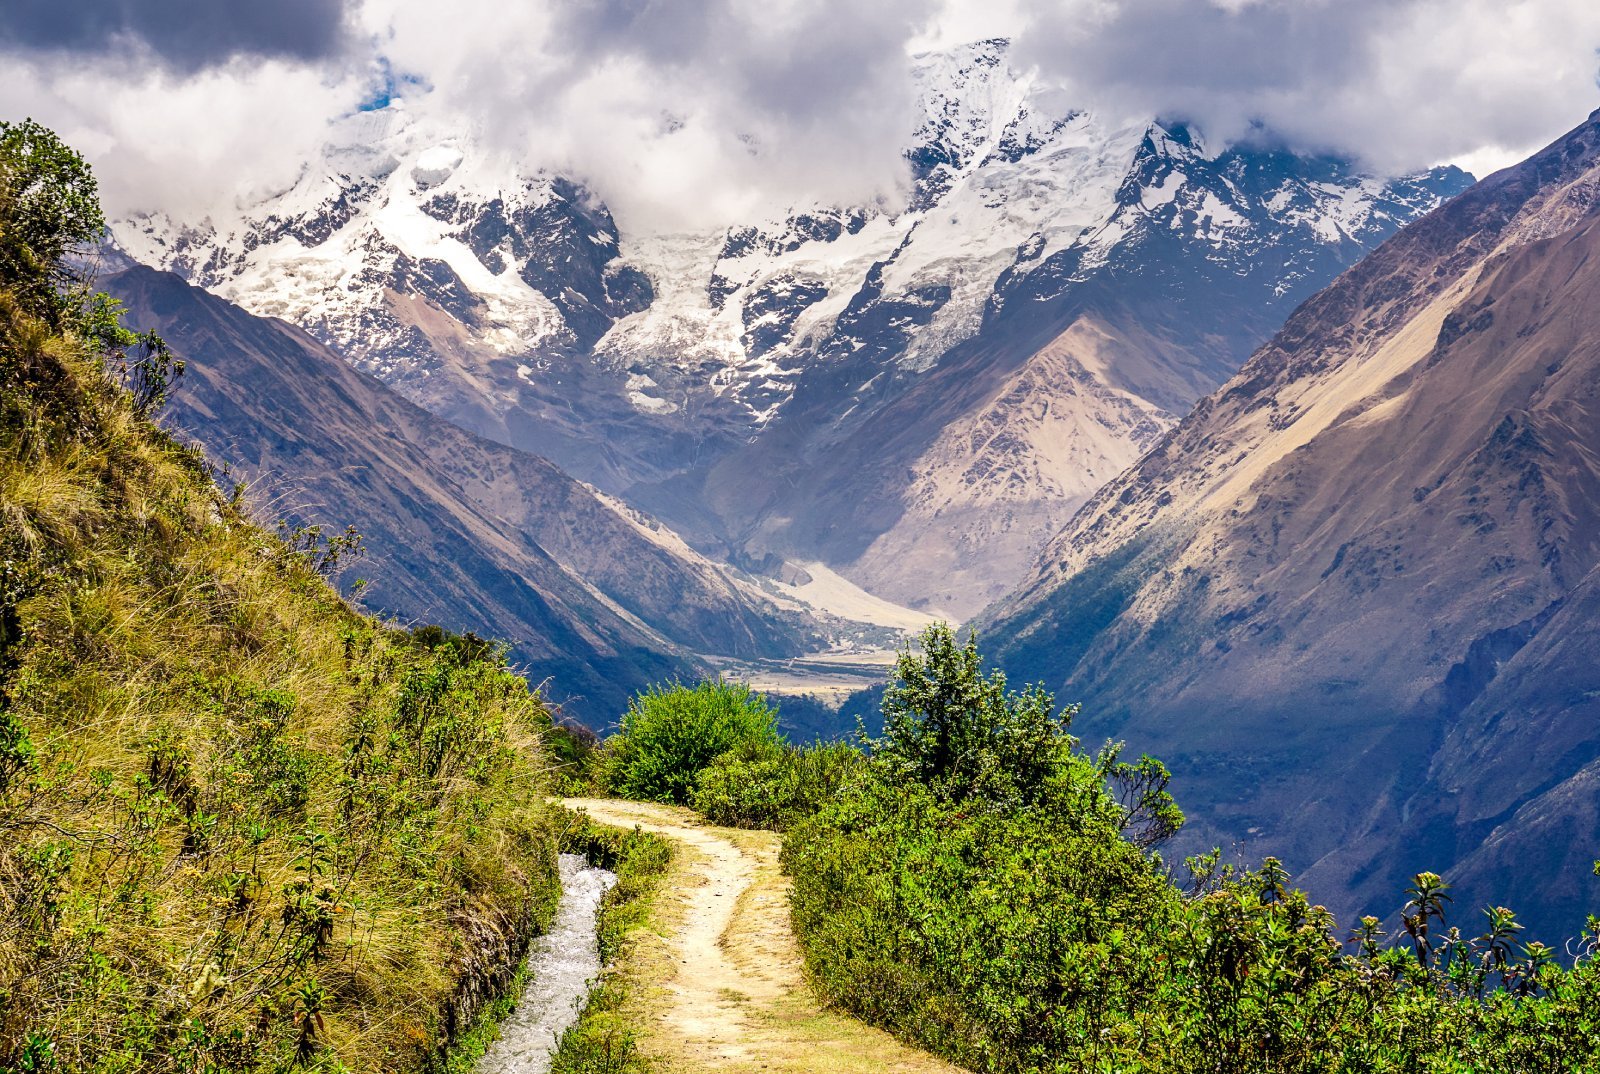 Image Credit: Shutterstock / Scott Biales DitchTheMap <p>History on a budget? Peru offers ancient Inca trails and Machu Picchu. High value, low cost, no visa required for up to 183 days—ideal for the history-loving pragmatist.</p>